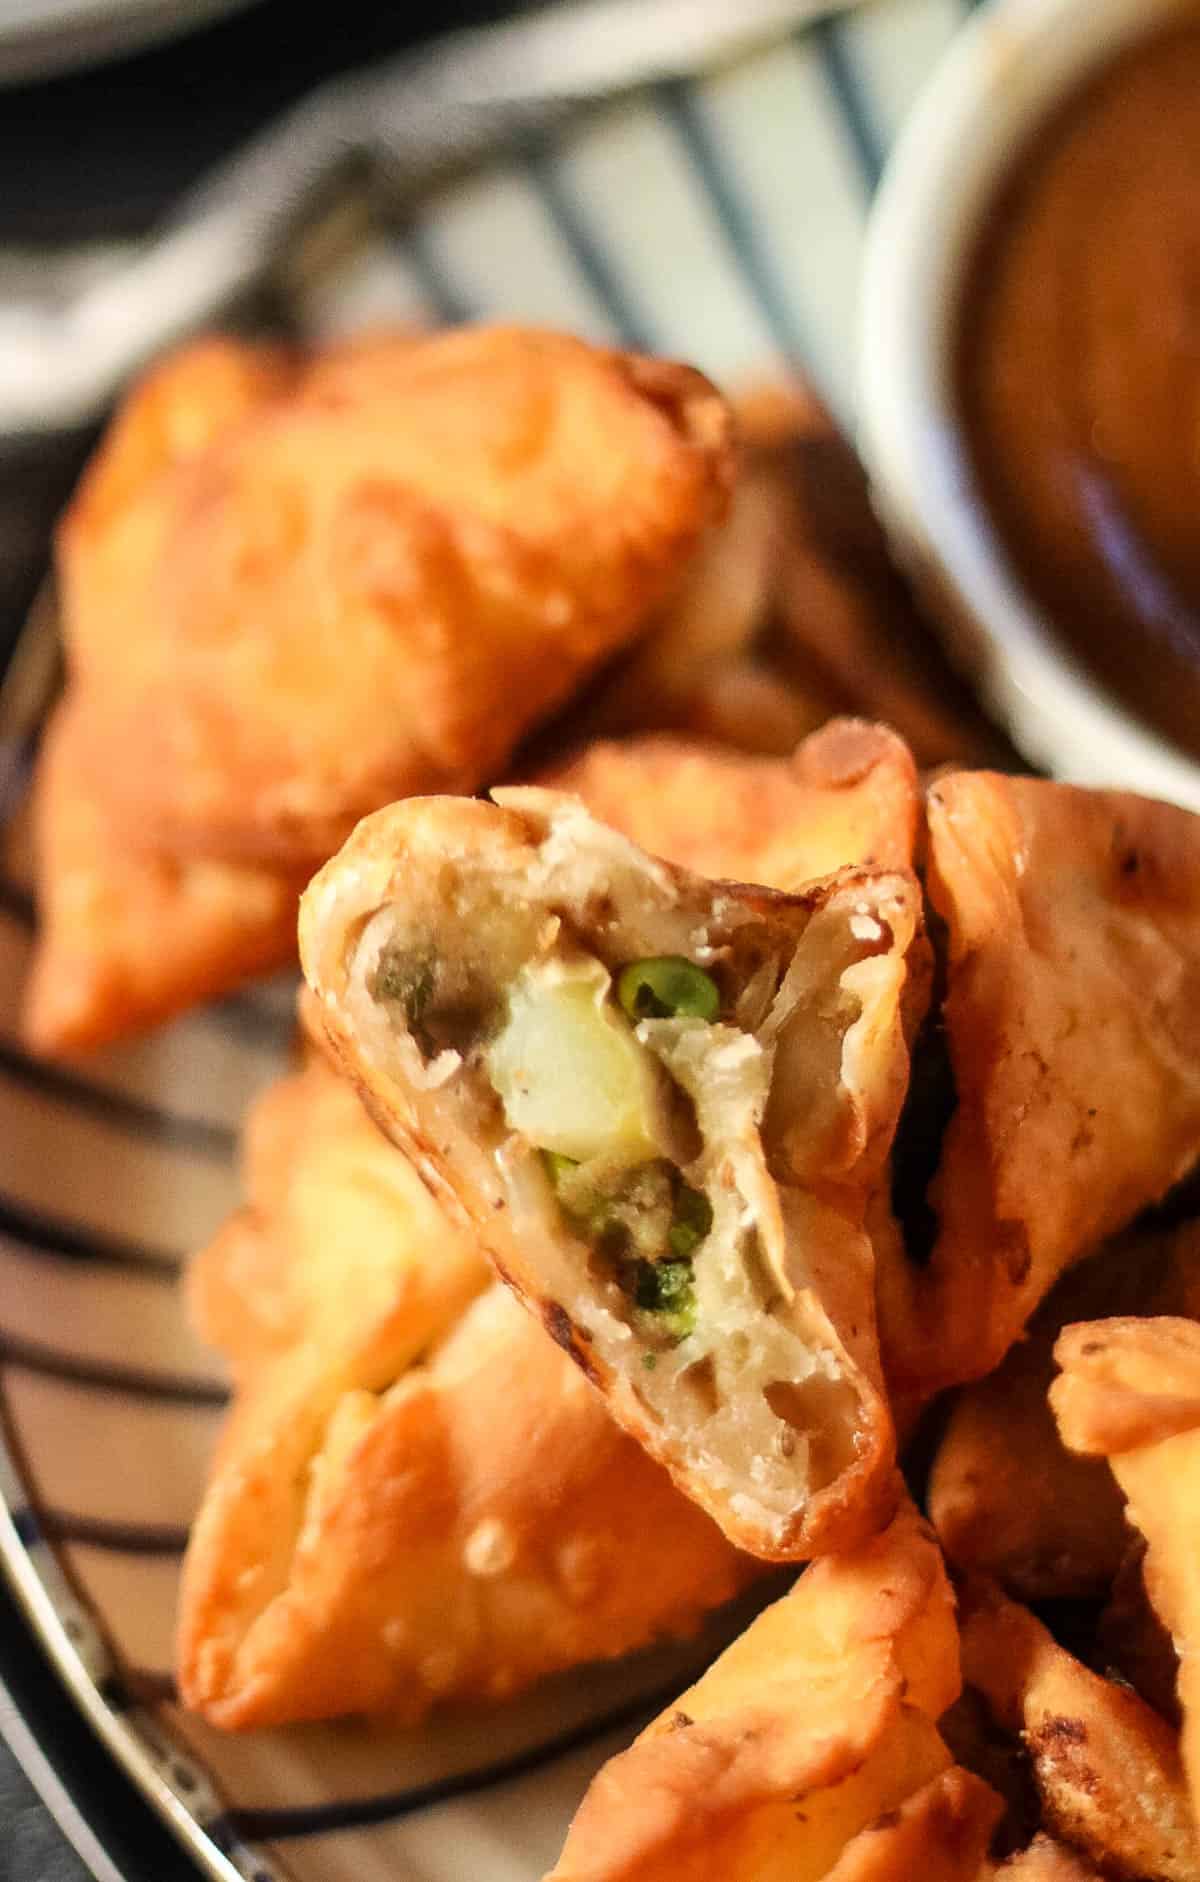 close up shot of the inside of a fried samosa with potato and pea filling.